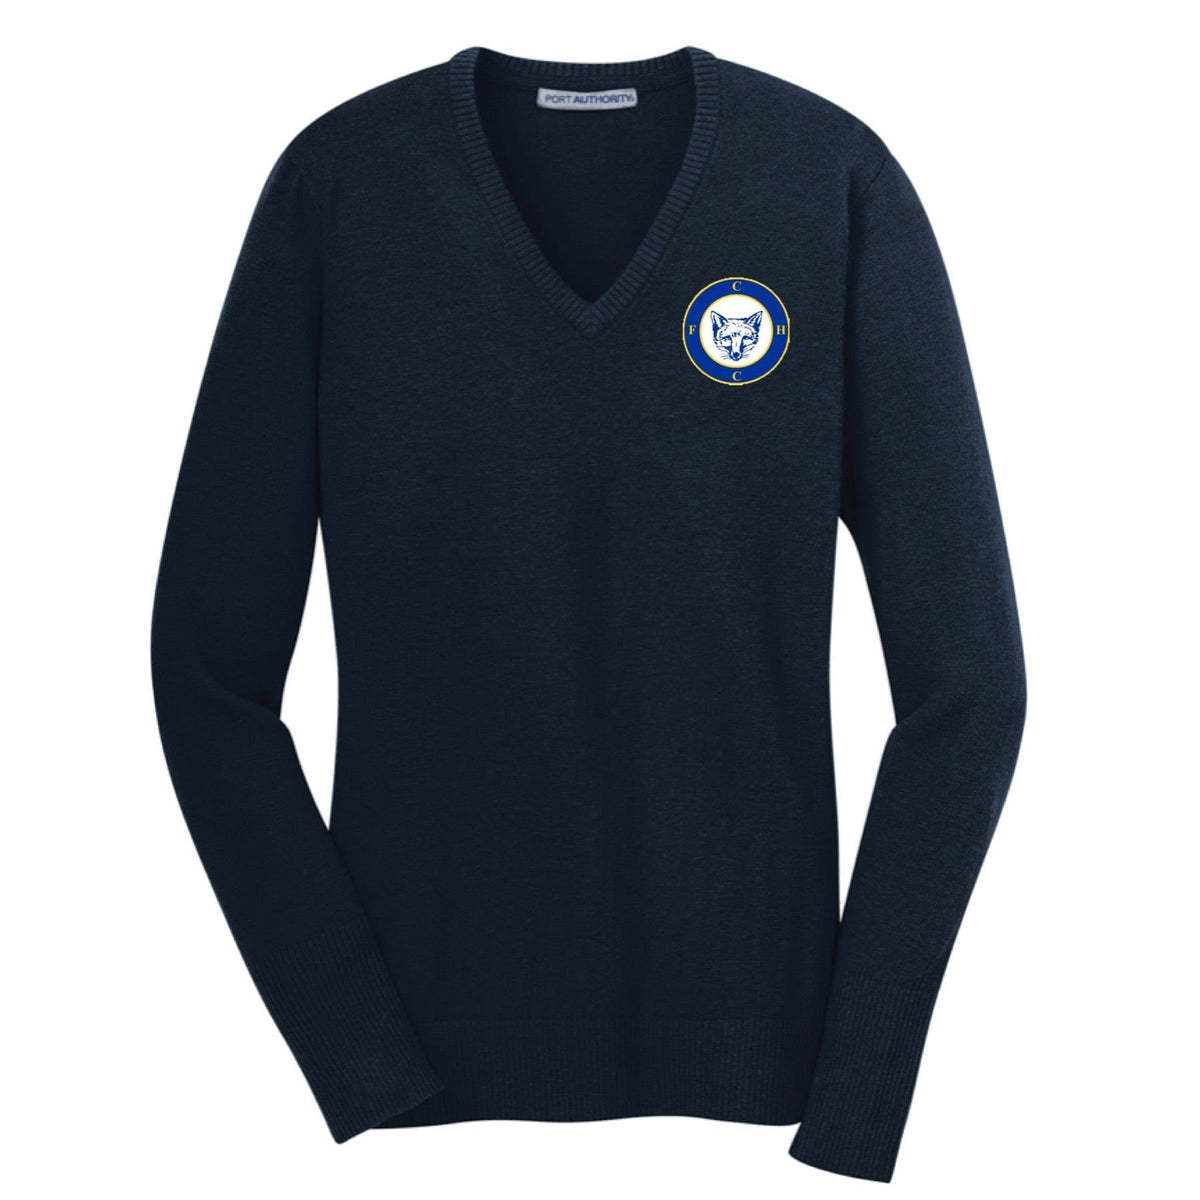 Equestrian Team Apparel FCHC Ladies V Sweater equestrian team apparel online tack store mobile tack store custom farm apparel custom show stable clothing equestrian lifestyle horse show clothing riding clothes horses equestrian tack store